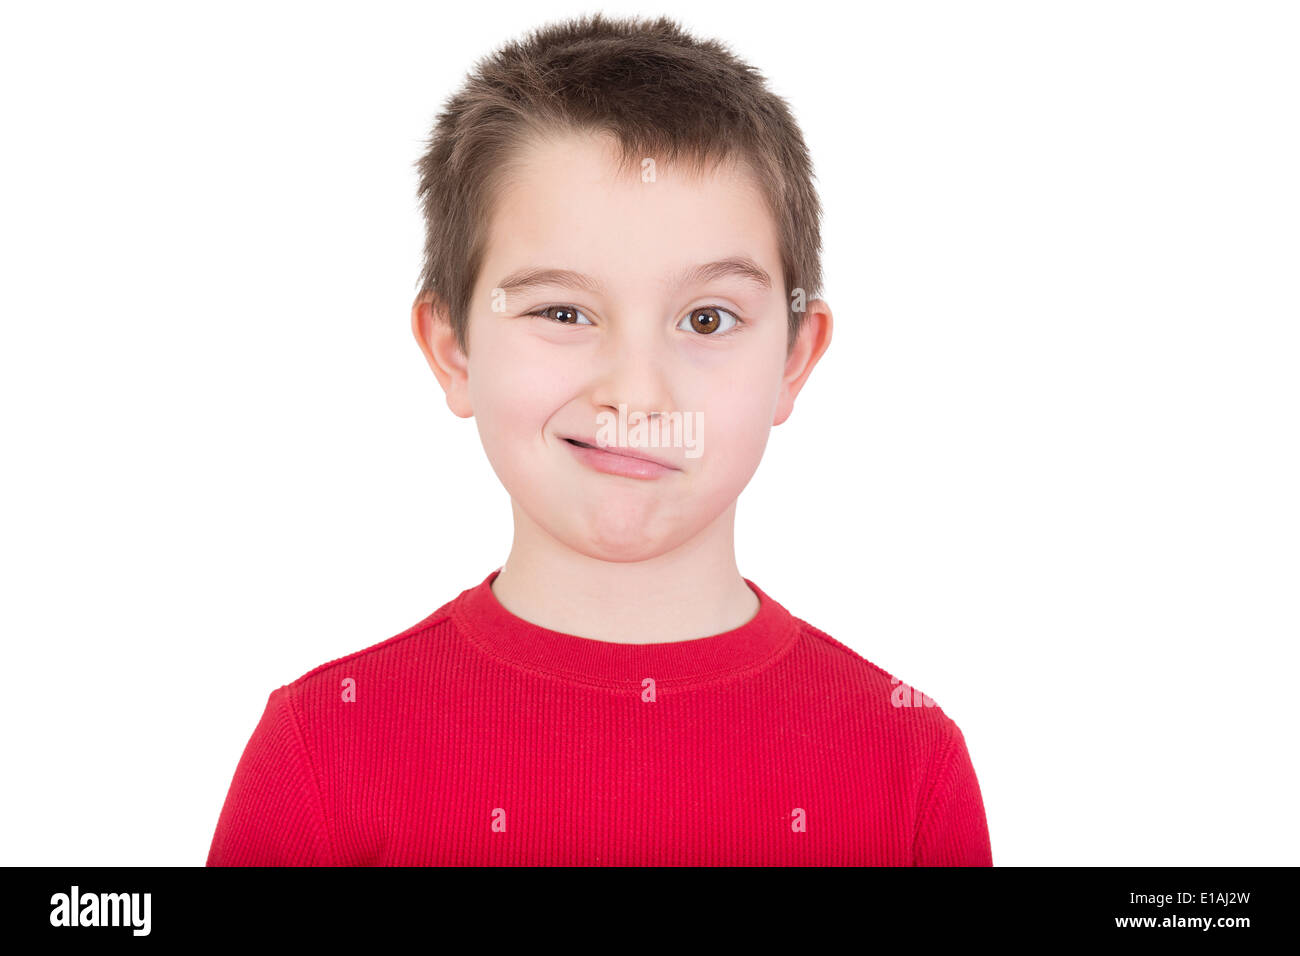 Cute playful young boy in a colorful red t-shirt standing winking at the camera, head and shoulders portrait isolated on white Stock Photo